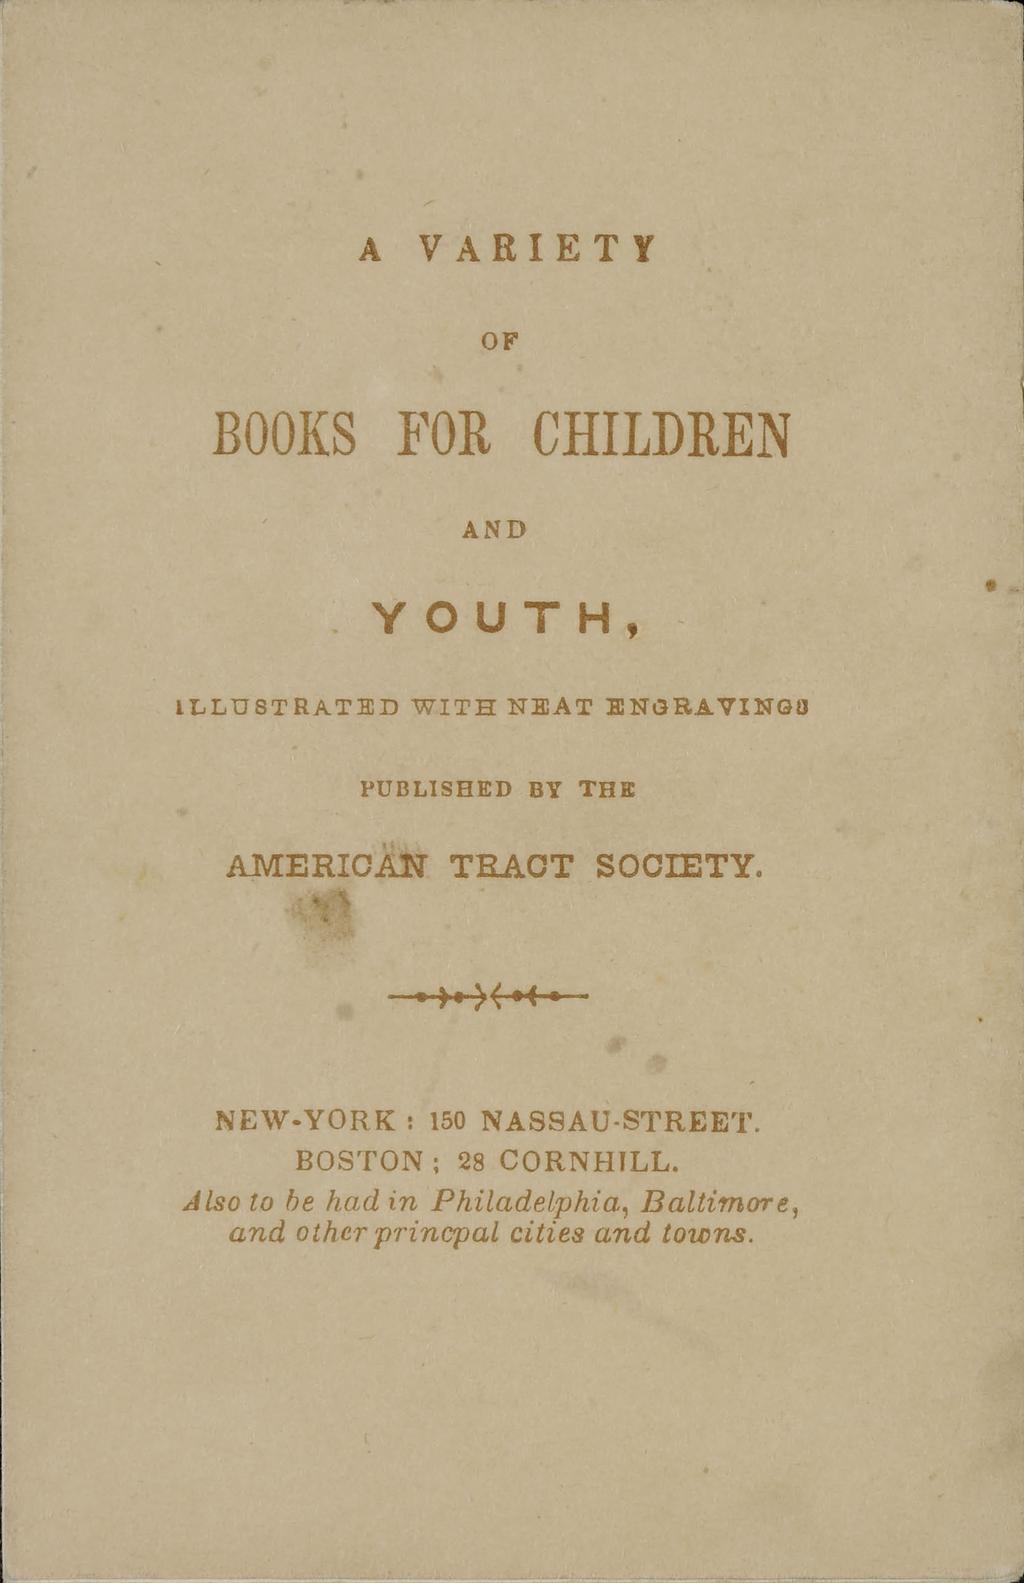 A VARIETY OF BOOKS FOR CHILDREN AND YOUTH, ILLU STRATED W ITH NEAT ENGRAVINGS PUBLISHED BY THE AMERICAN TRA CT SOCIETY.